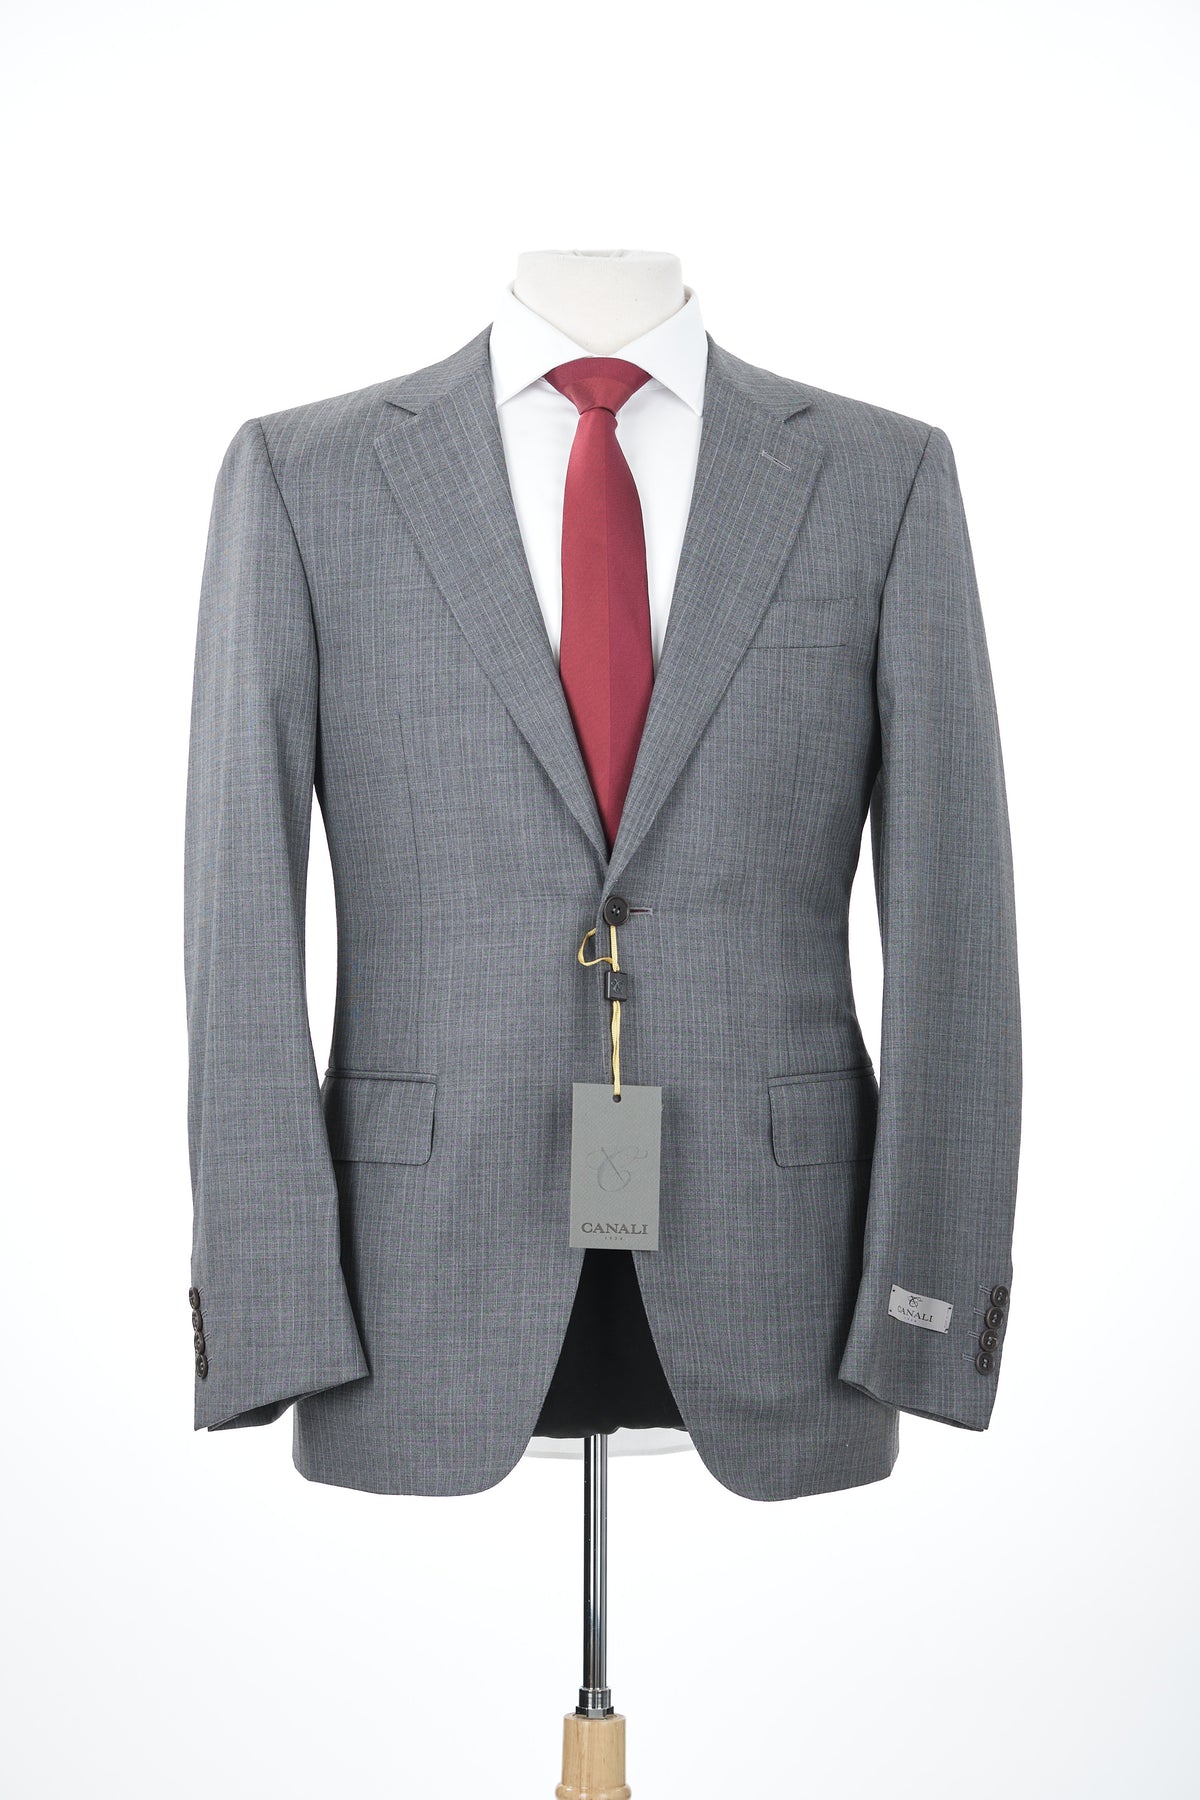 Canali 1934 Mens Gray Pinstriped 44R Drop 7 100% Wool 2 Piece Suit